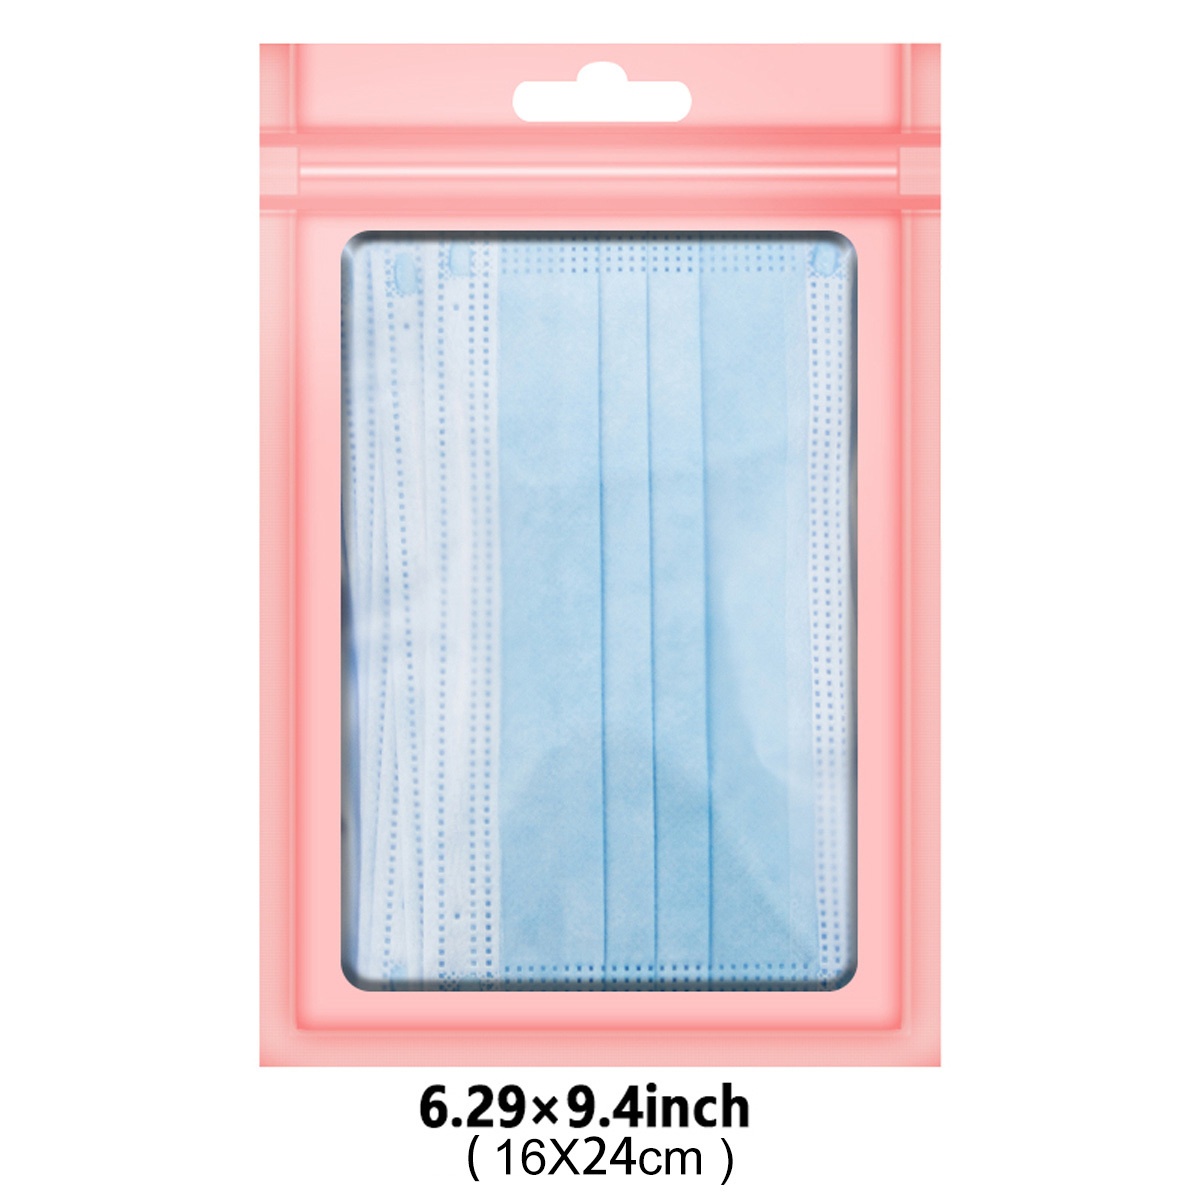 1 QUART Smell Proof Bags with Clear Window Resealable Mylar Bags Leak —  Wisesorbent Store